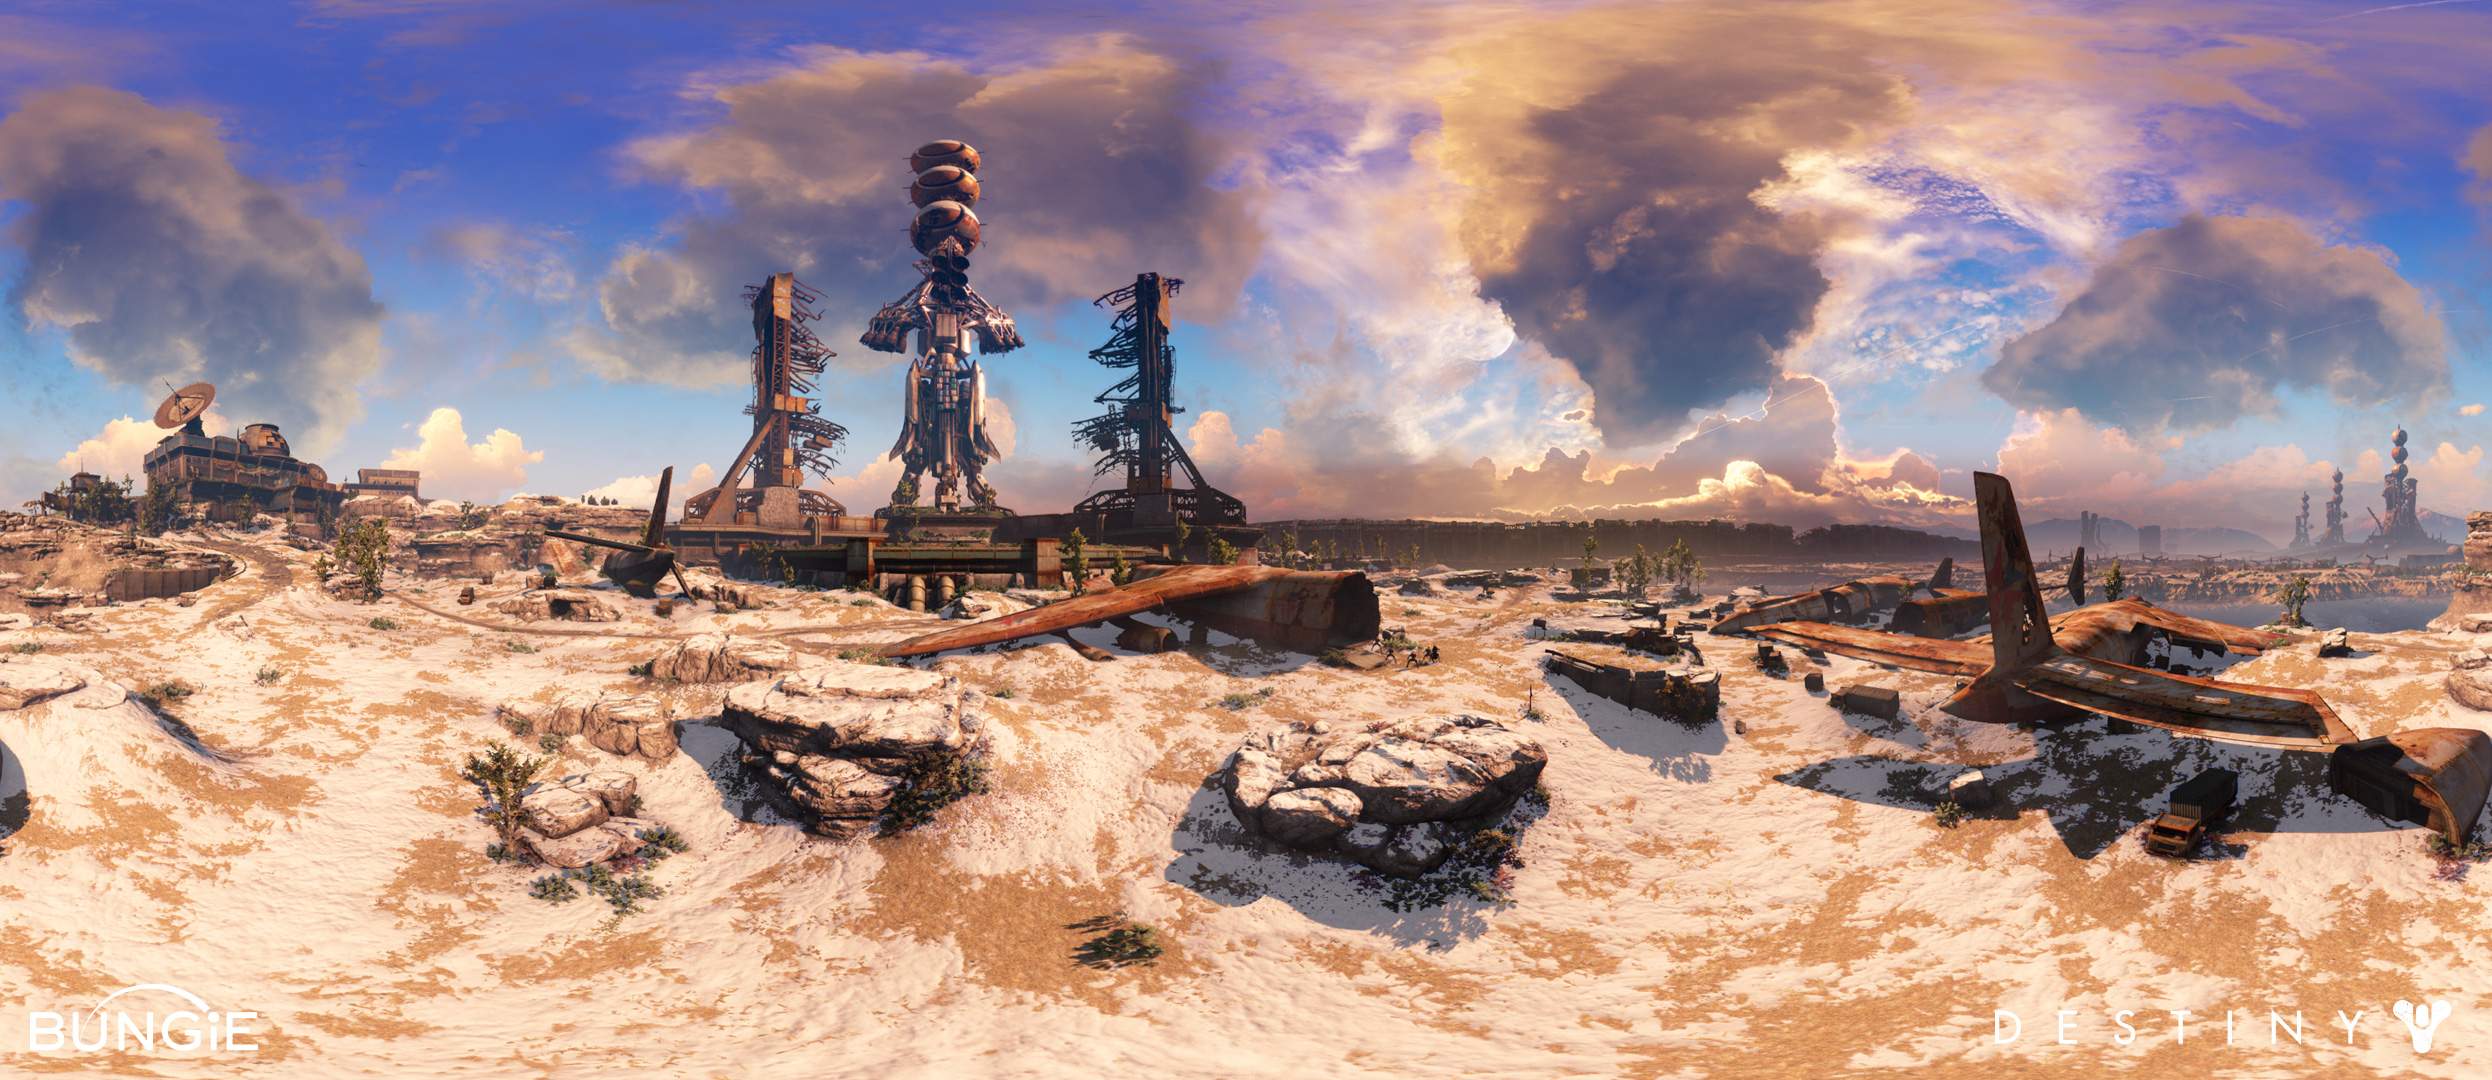  the Cosmodrome which was the first area visited in the Destiny alpha